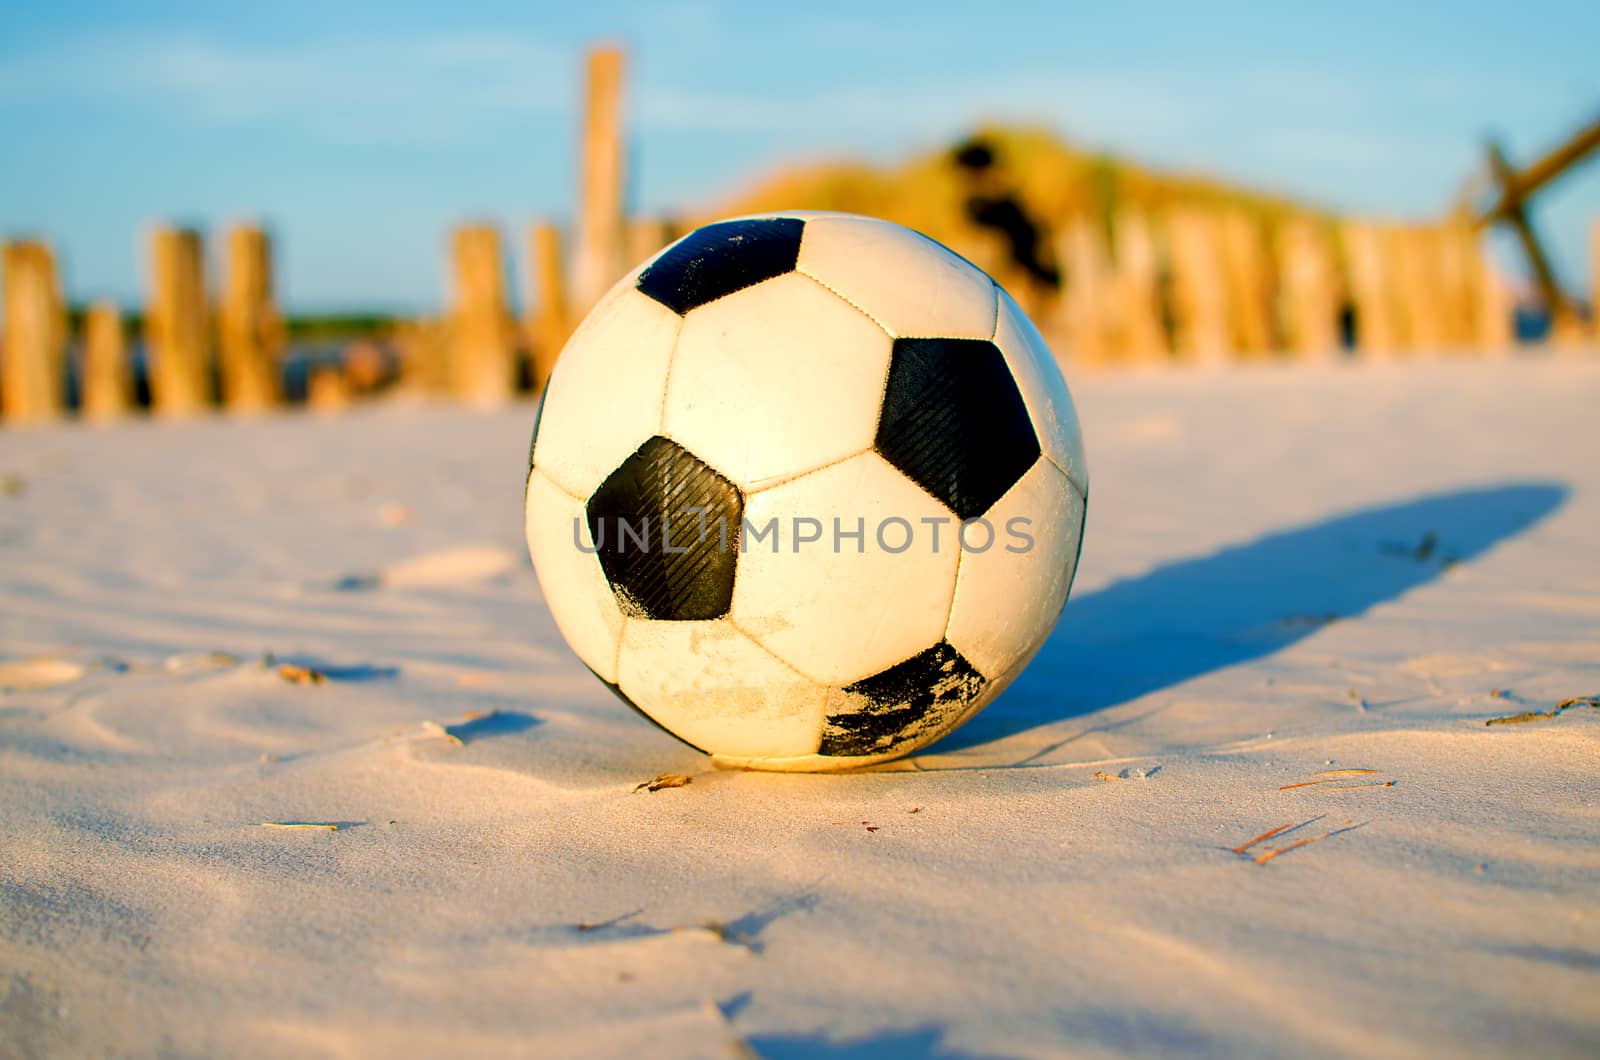 Classic black and white football soccer ball sits on sand beach